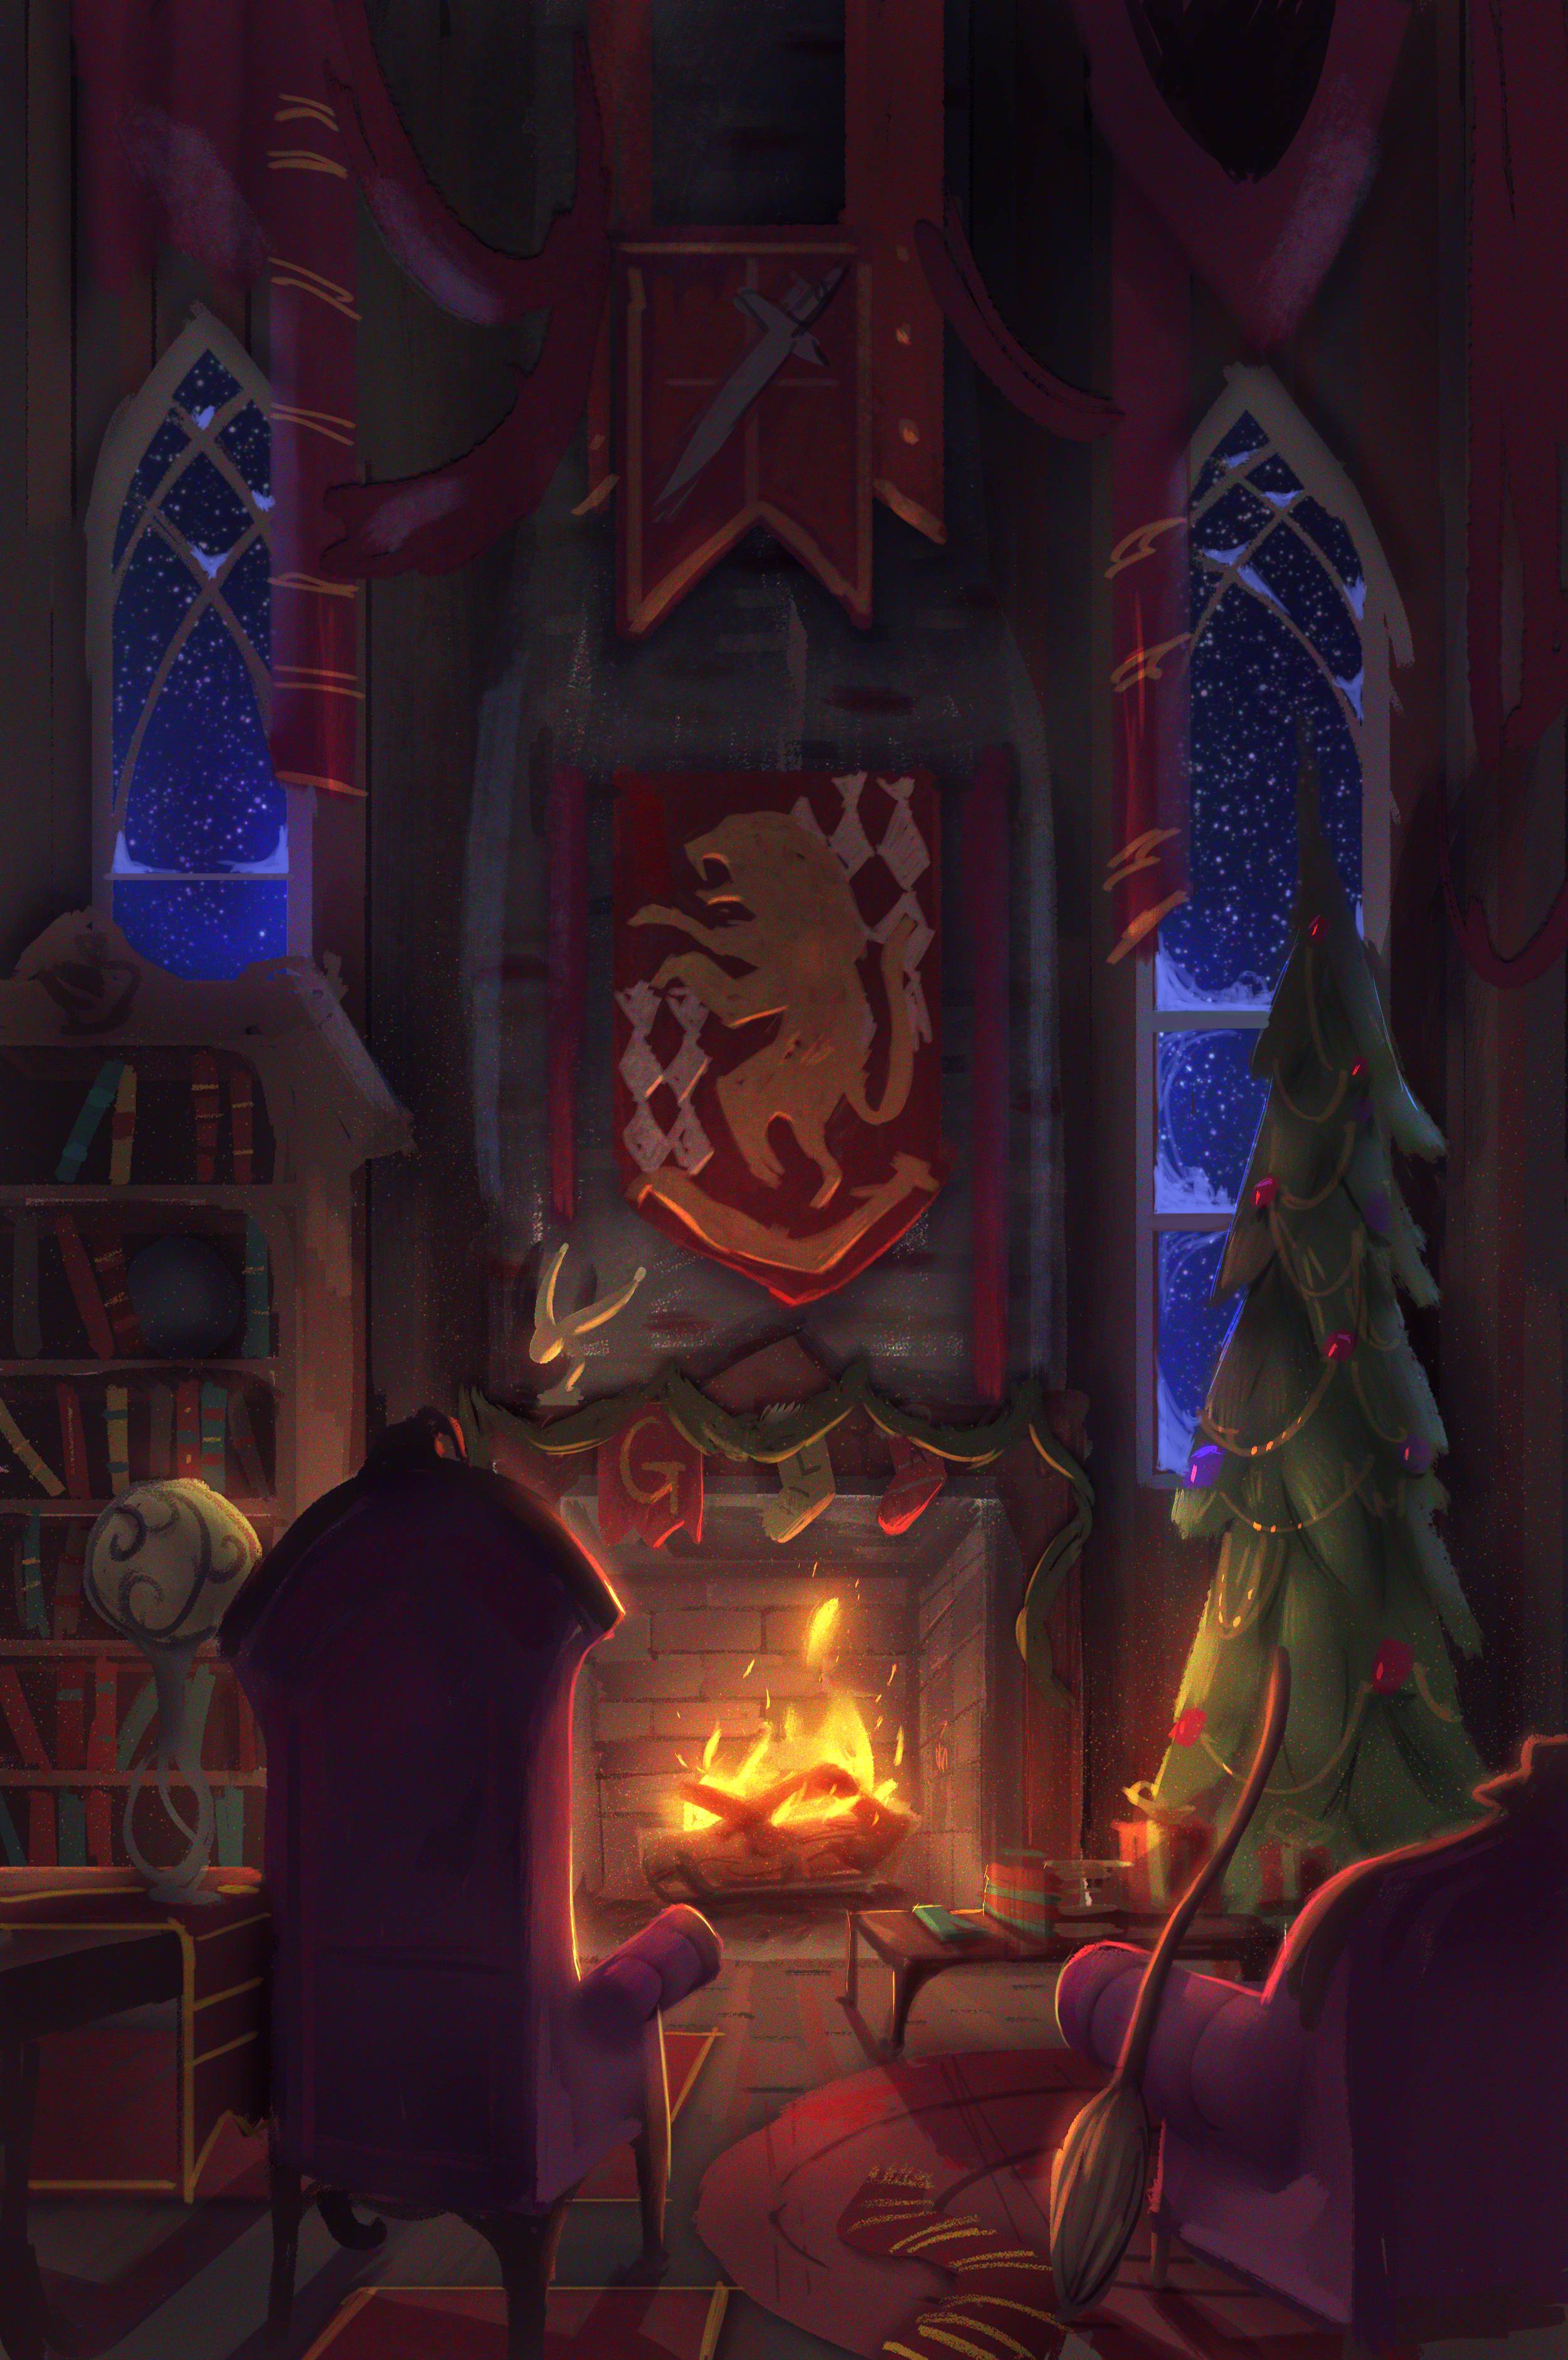 I painted the Gryffindor common room during Christmas time